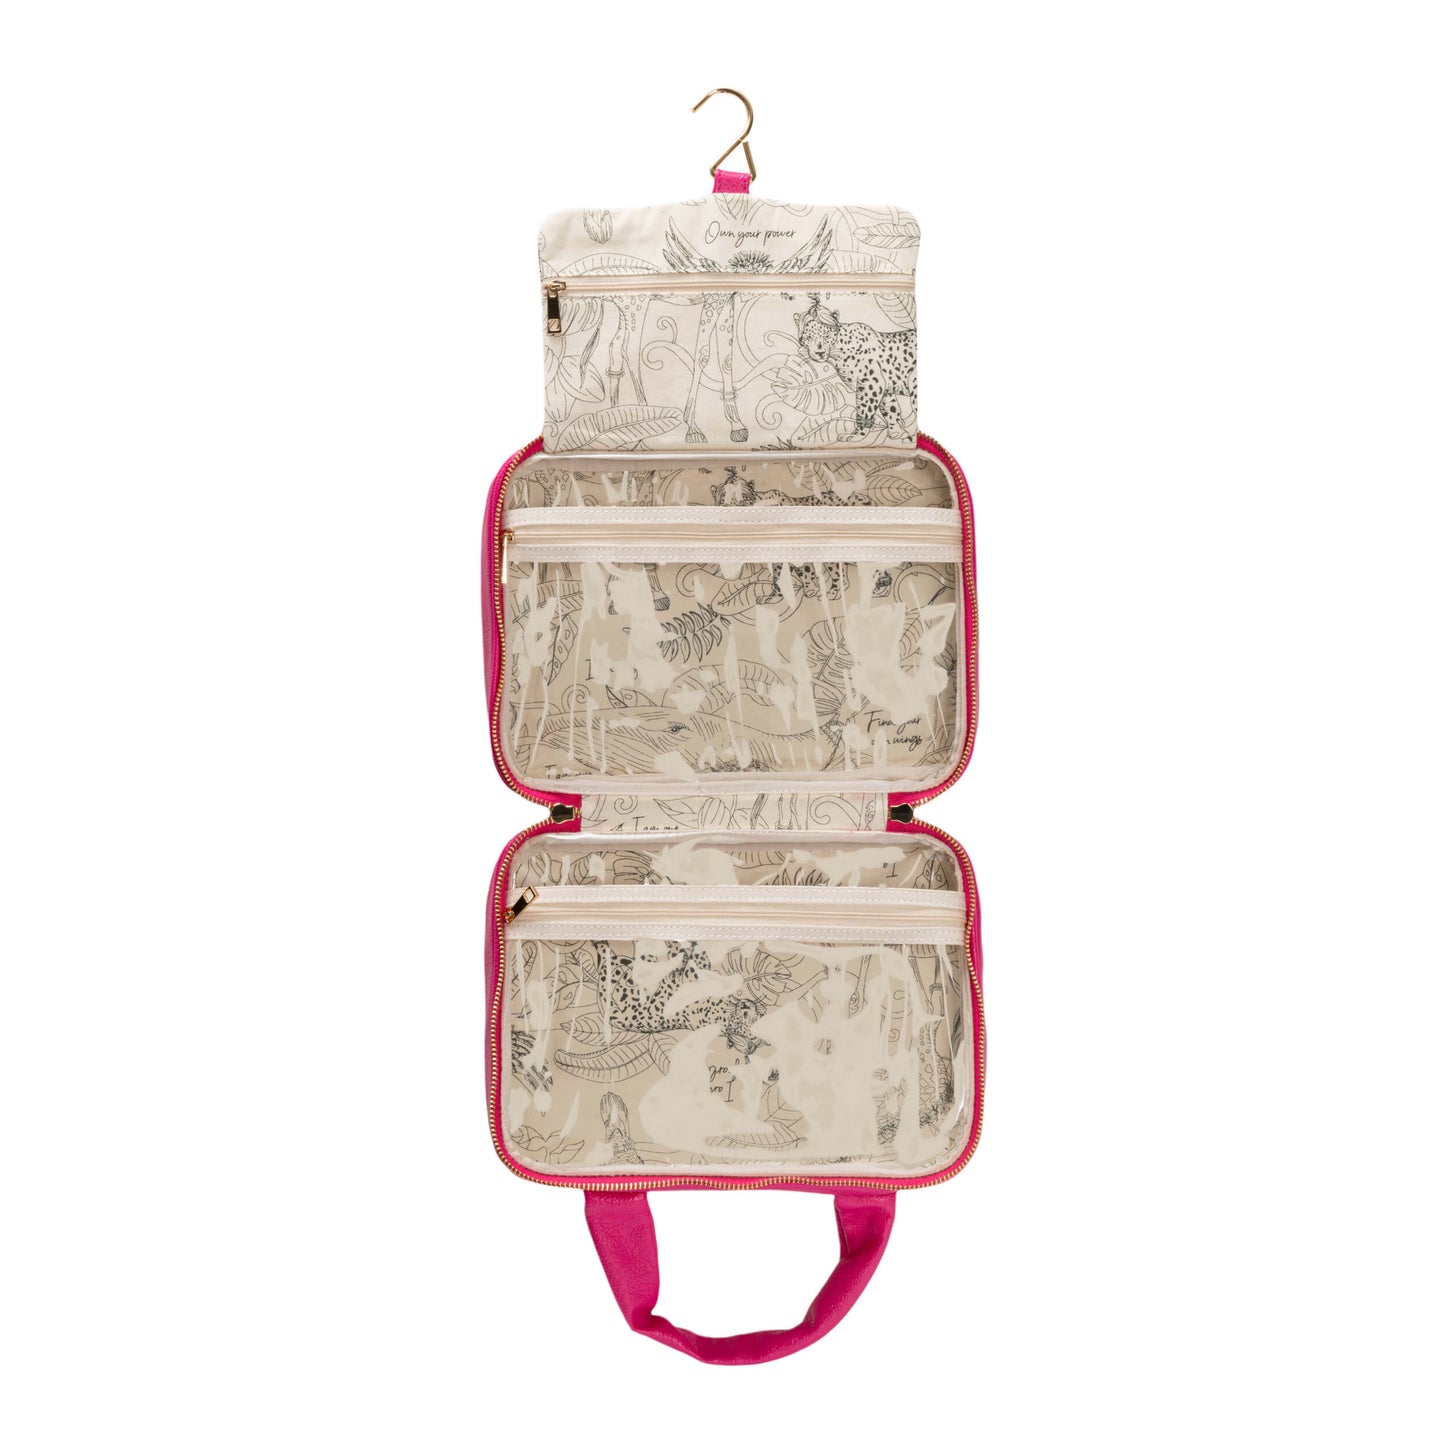 The Leah suitcase - Brave Pink (Customizable)